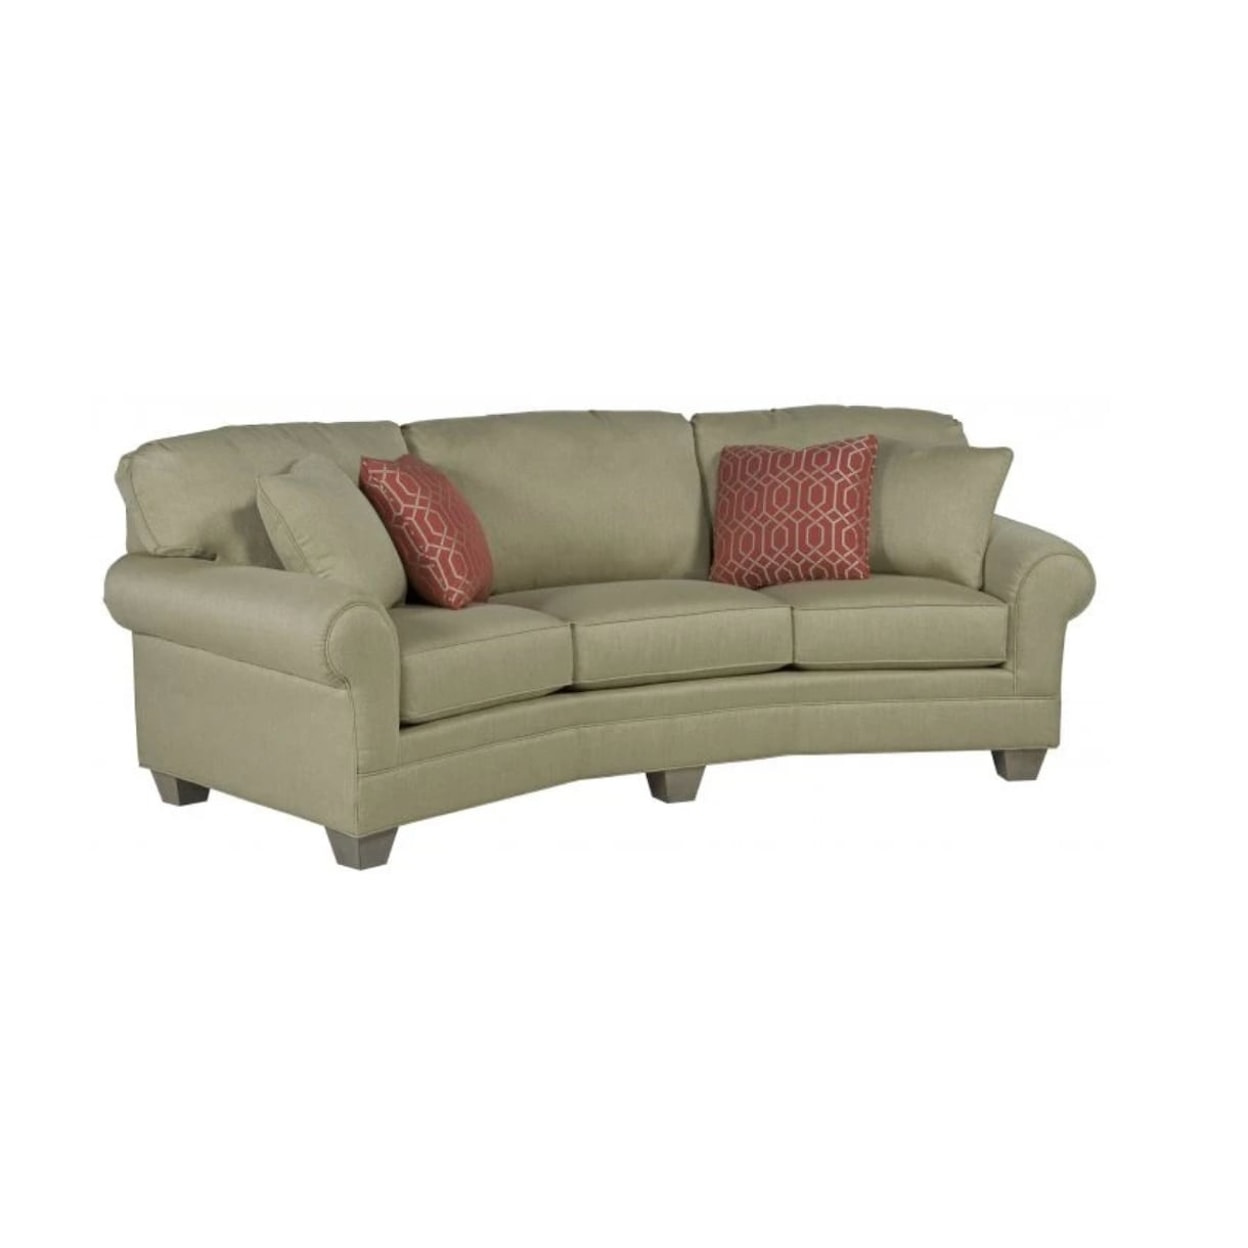 Fairfield Sofa Accents Curved Conversation Sofa with Rolled Arms